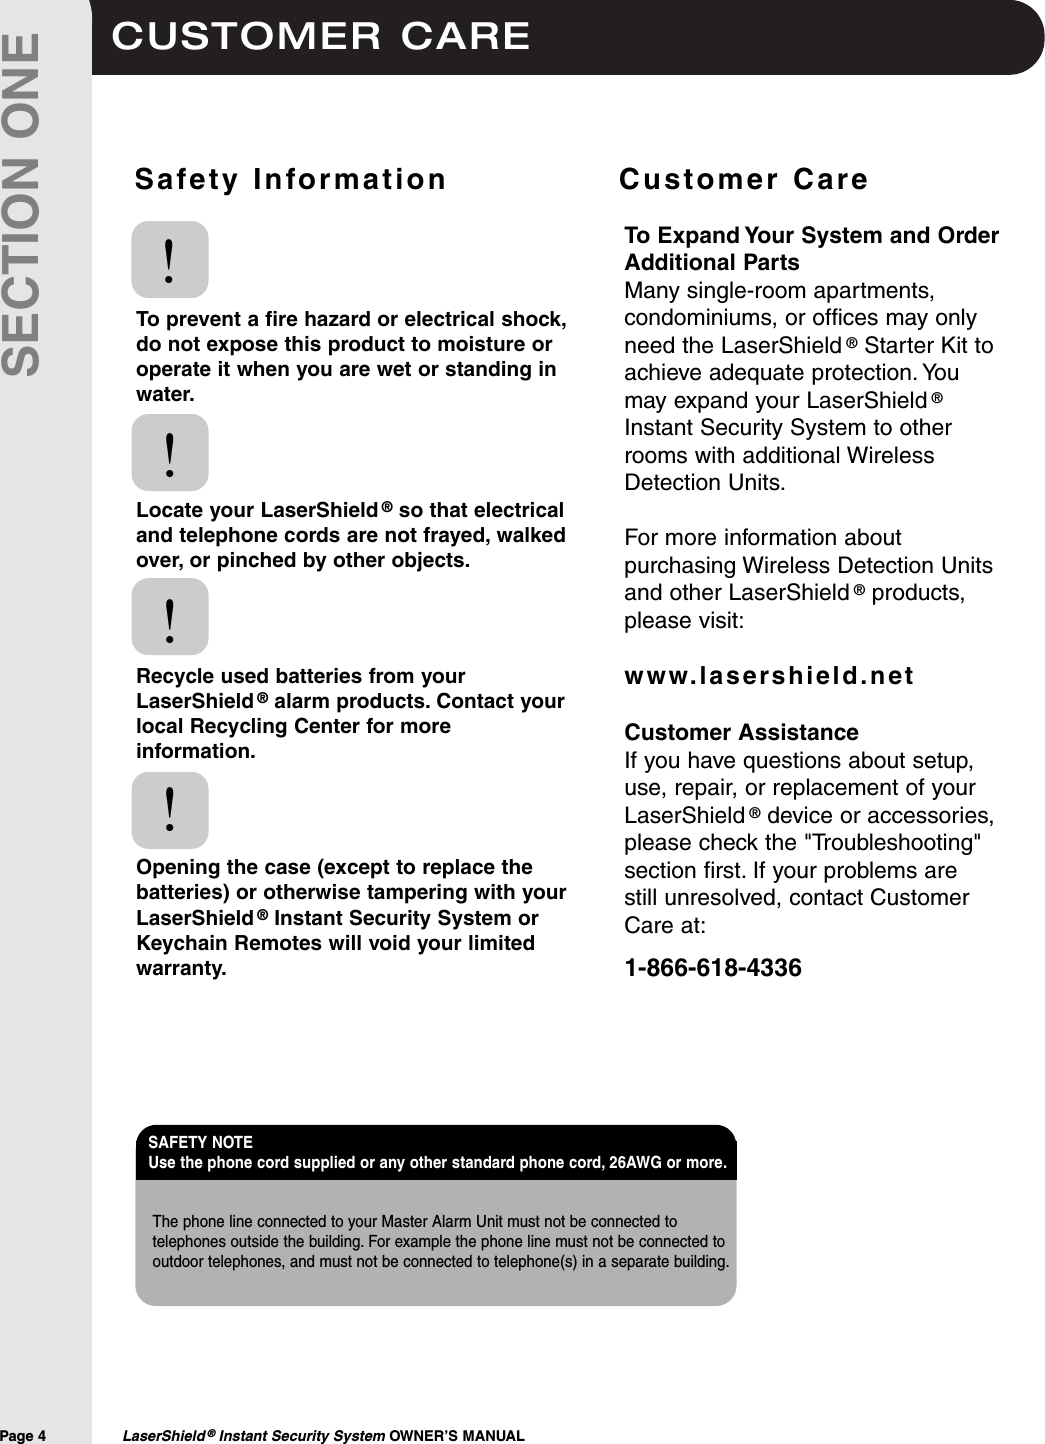 CUSTOMER CAREPage 4  LaserShield ®Instant Security System OWNER’S MANUALSECTION ONESafety Information              Customer CareTo prevent a fire hazard or electrical shock,do not expose this product to moisture oroperate it when you are wet or standing inwater.Locate your LaserShield ®so that electricaland telephone cords are not frayed, walkedover, or pinched by other objects.Recycle used batteries from yourLaserShield ®alarm products. Contact yourlocal Recycling Center for moreinformation.Opening the case (except to replace thebatteries) or otherwise tampering with yourLaserShield ®Instant Security System orKeychain Remotes will void your limitedwarranty.!!!!To Expand Your System and OrderAdditional PartsMany single-room apartments,condominiums, or offices may onlyneed the LaserShield ®Starter Kit toachieve adequate protection. Youmay expand your LaserShield ®Instant Security System to otherrooms with additional WirelessDetection Units.For more information aboutpurchasing Wireless Detection Unitsand other LaserShield ®products,please visit:www.lasershield.netCustomer AssistanceIf you have questions about setup,use, repair, or replacement of yourLaserShield ®device or accessories,please check the &quot;Troubleshooting&quot;section first. If your problems are still unresolved, contact CustomerCare at:1-866-618-4336The phone line connected to your Master Alarm Unit must not be connected totelephones outside the building. For example the phone line must not be connected tooutdoor telephones, and must not be connected to telephone(s) in a separate building.SAFETY NOTE Use the phone cord supplied or any other standard phone cord, 26AWG or more.